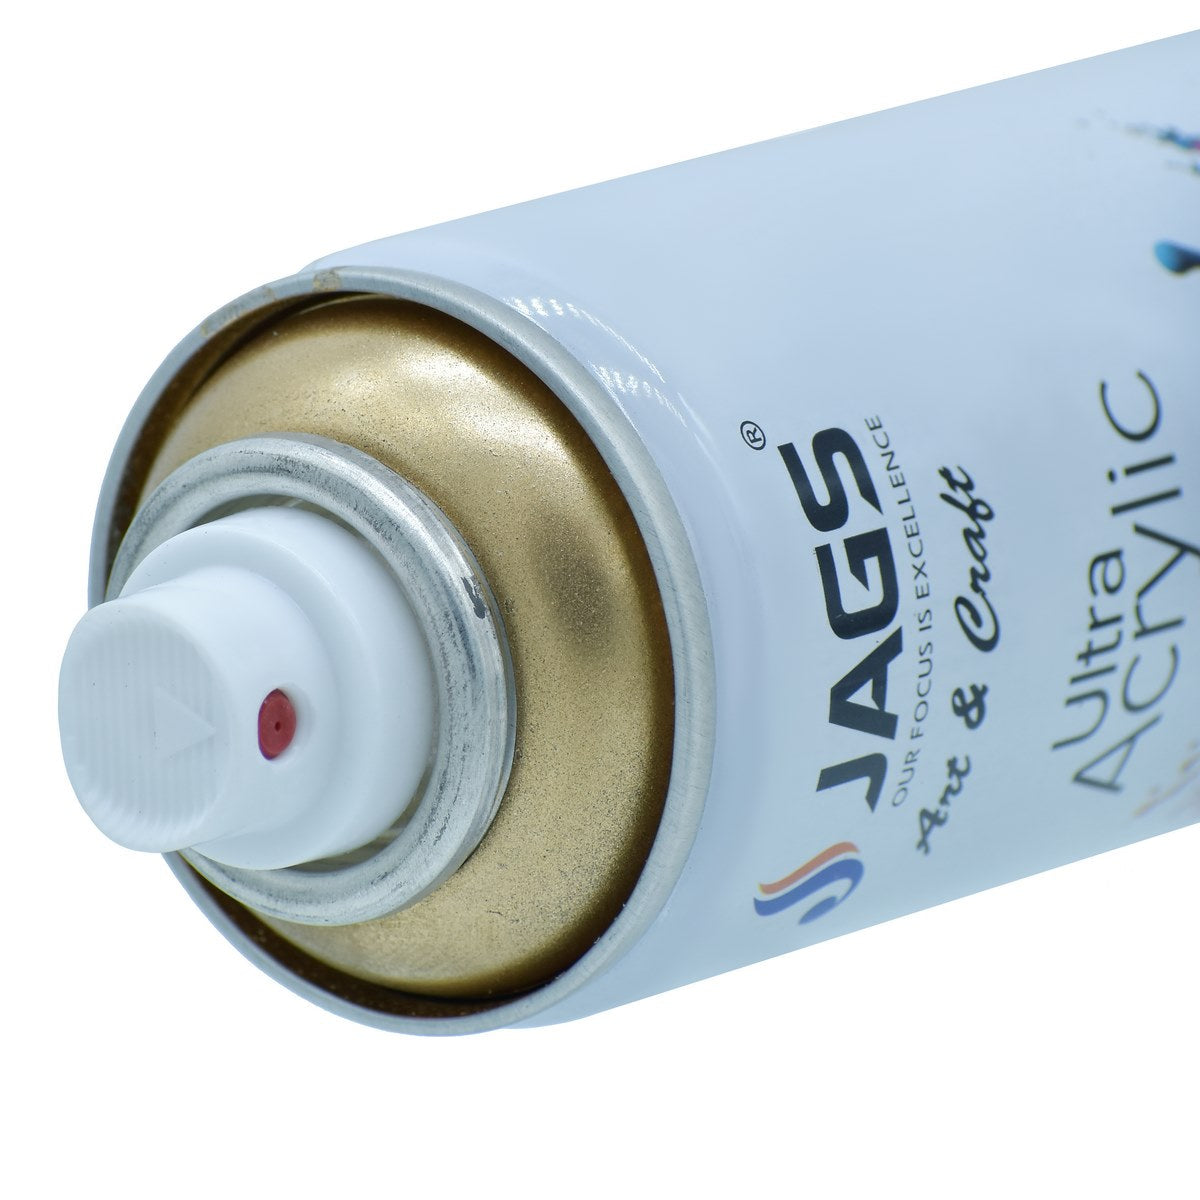 jags-mumbai Paint & Colours Jags Spray Ultra Acrylic 150ml Metallic Gold - Gilded Opulence for Your Masterpieces